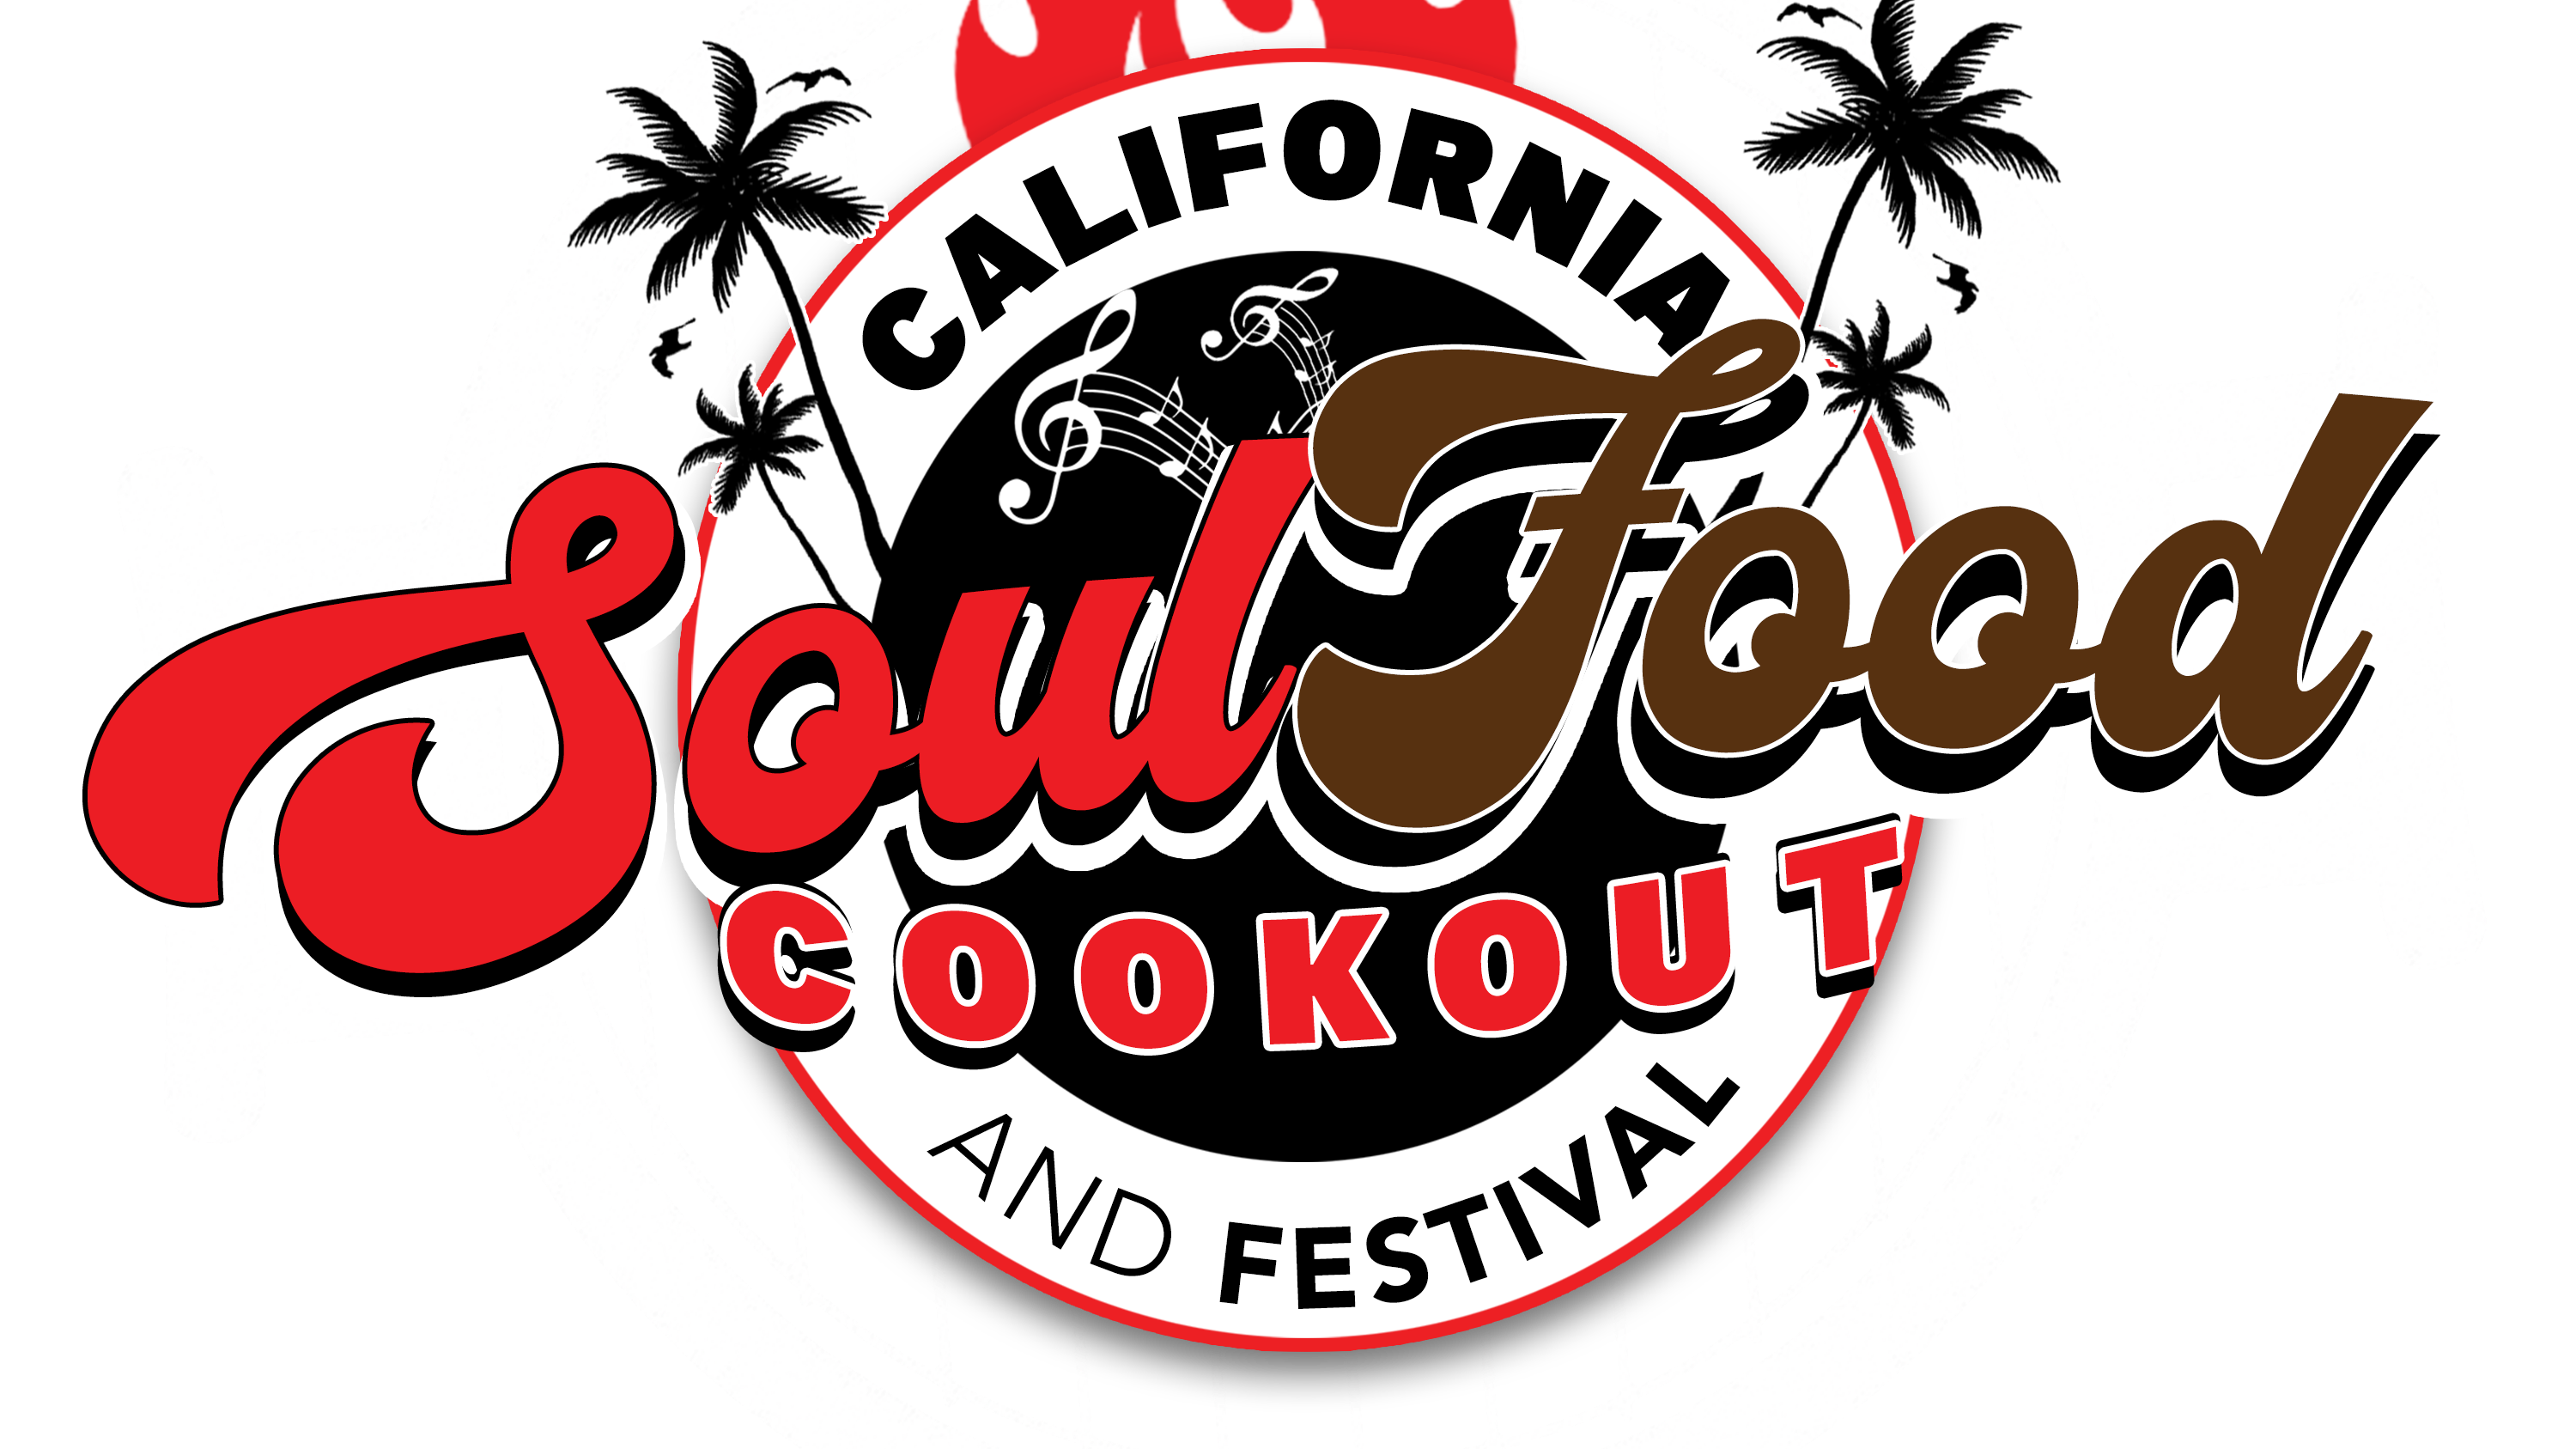 California Soul Food Cookout and Festival to Benefit Regional Charities 3